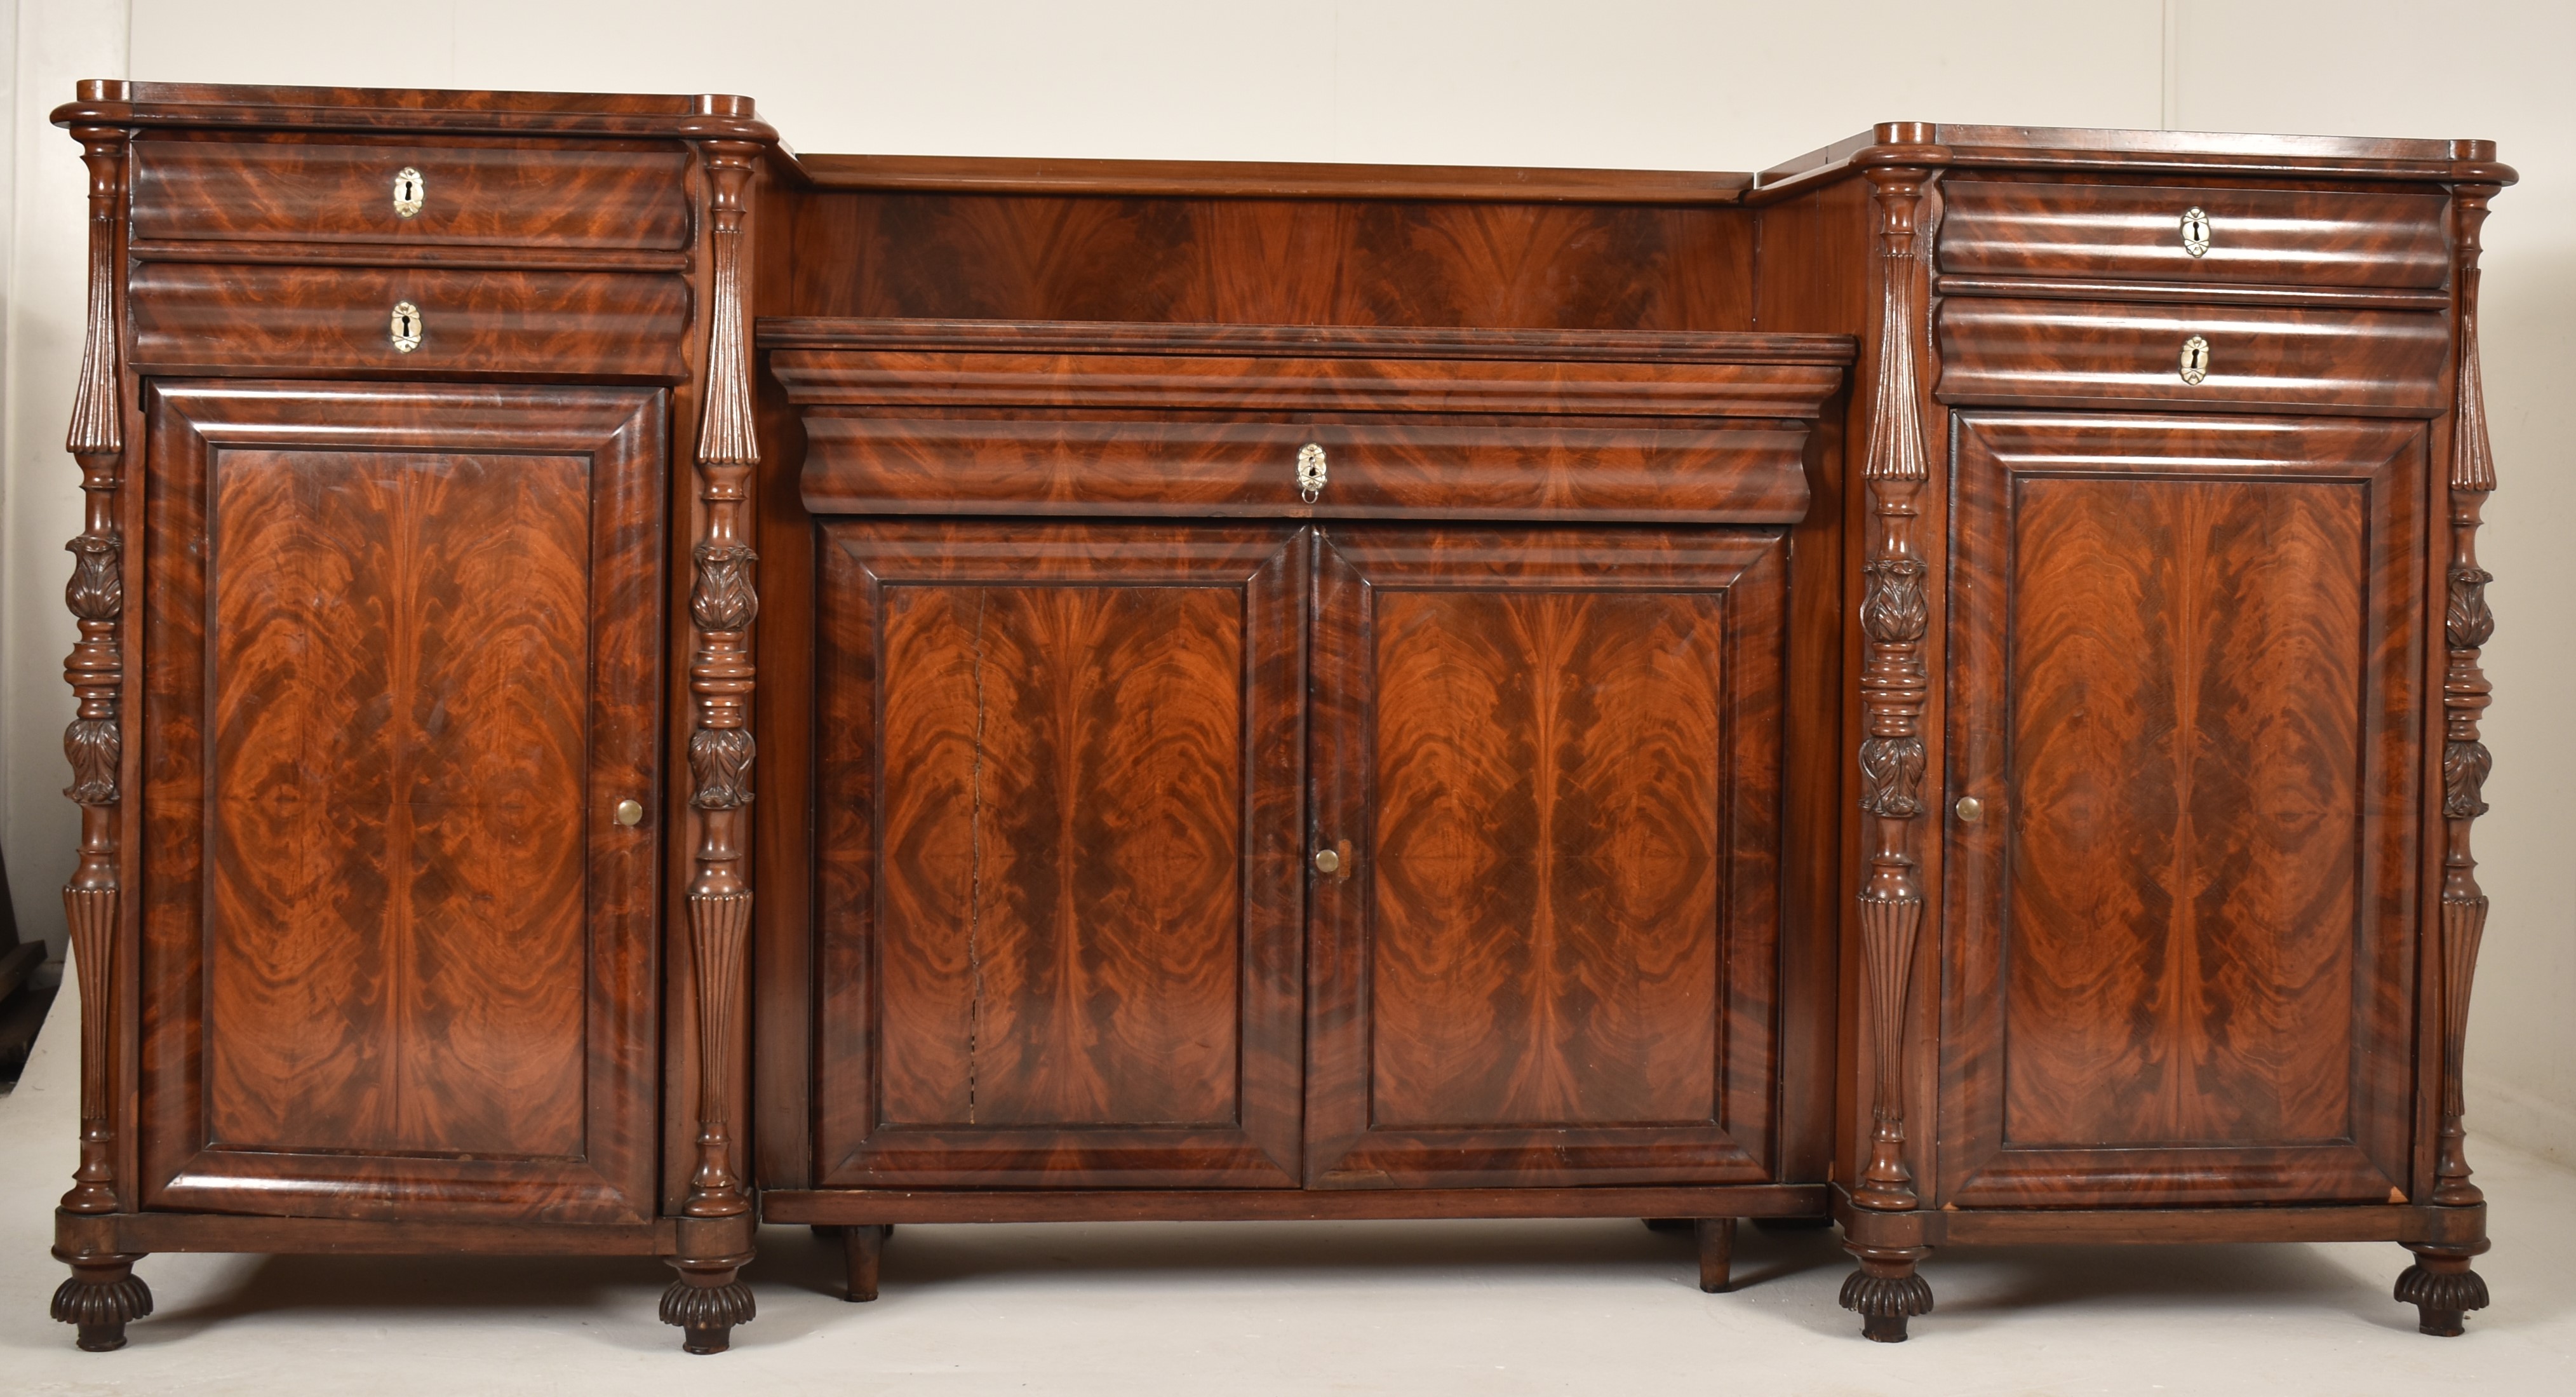 19TH CENTURY VICTORIAN INVERTED BREAKFRONT SIDEBOARD - Image 2 of 14